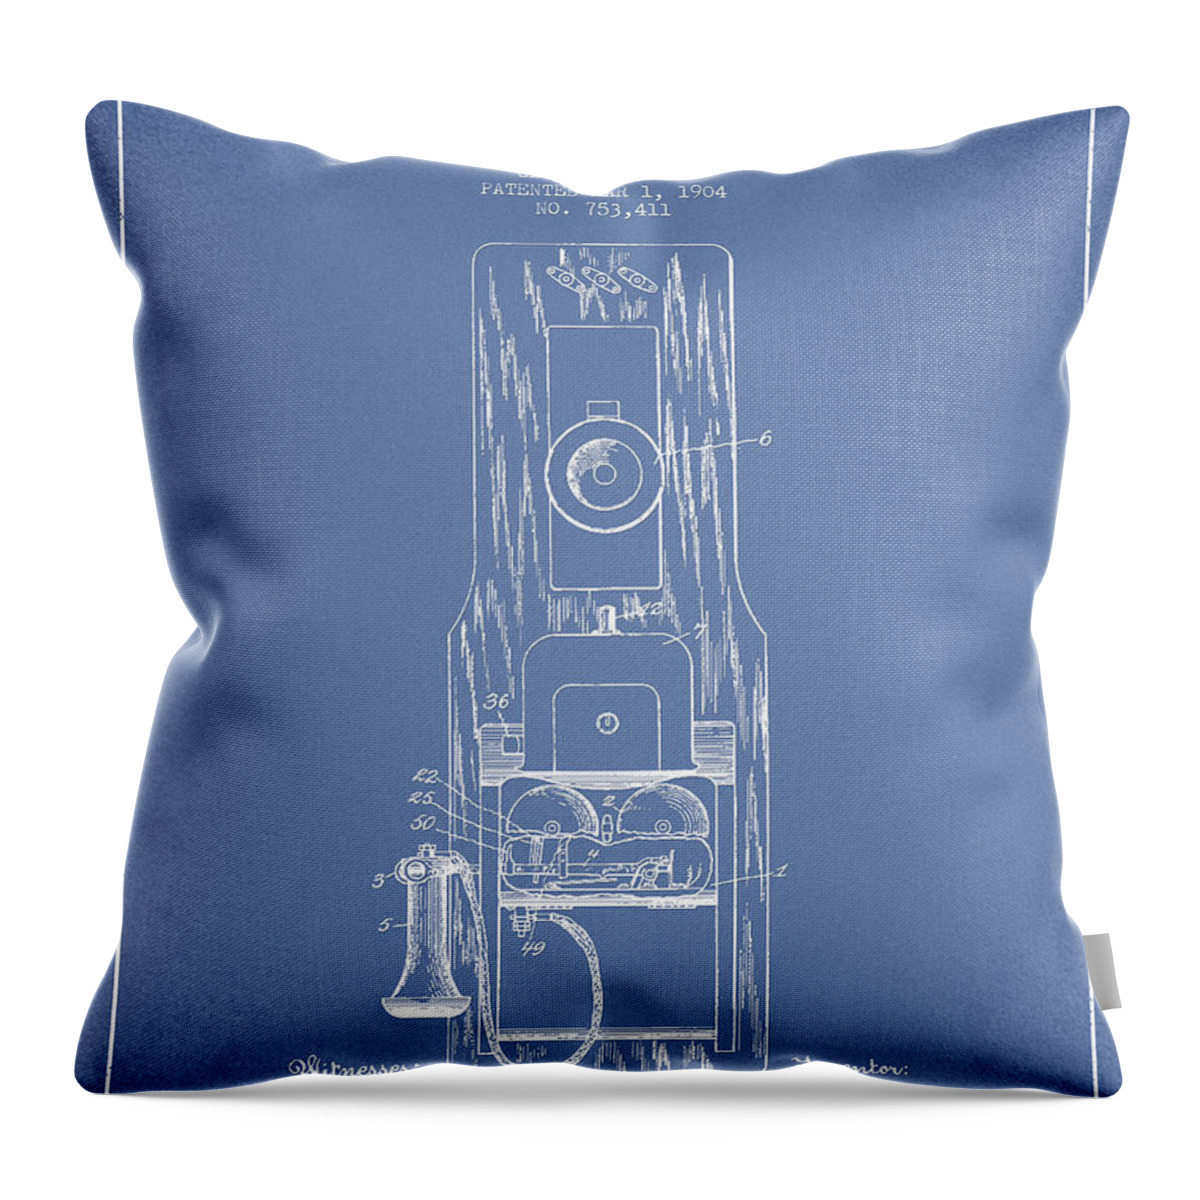 Telephone Throw Pillow featuring the digital art Telephone Toll Apparatus Patent Drawing From 1904 - Light Blue by Aged Pixel